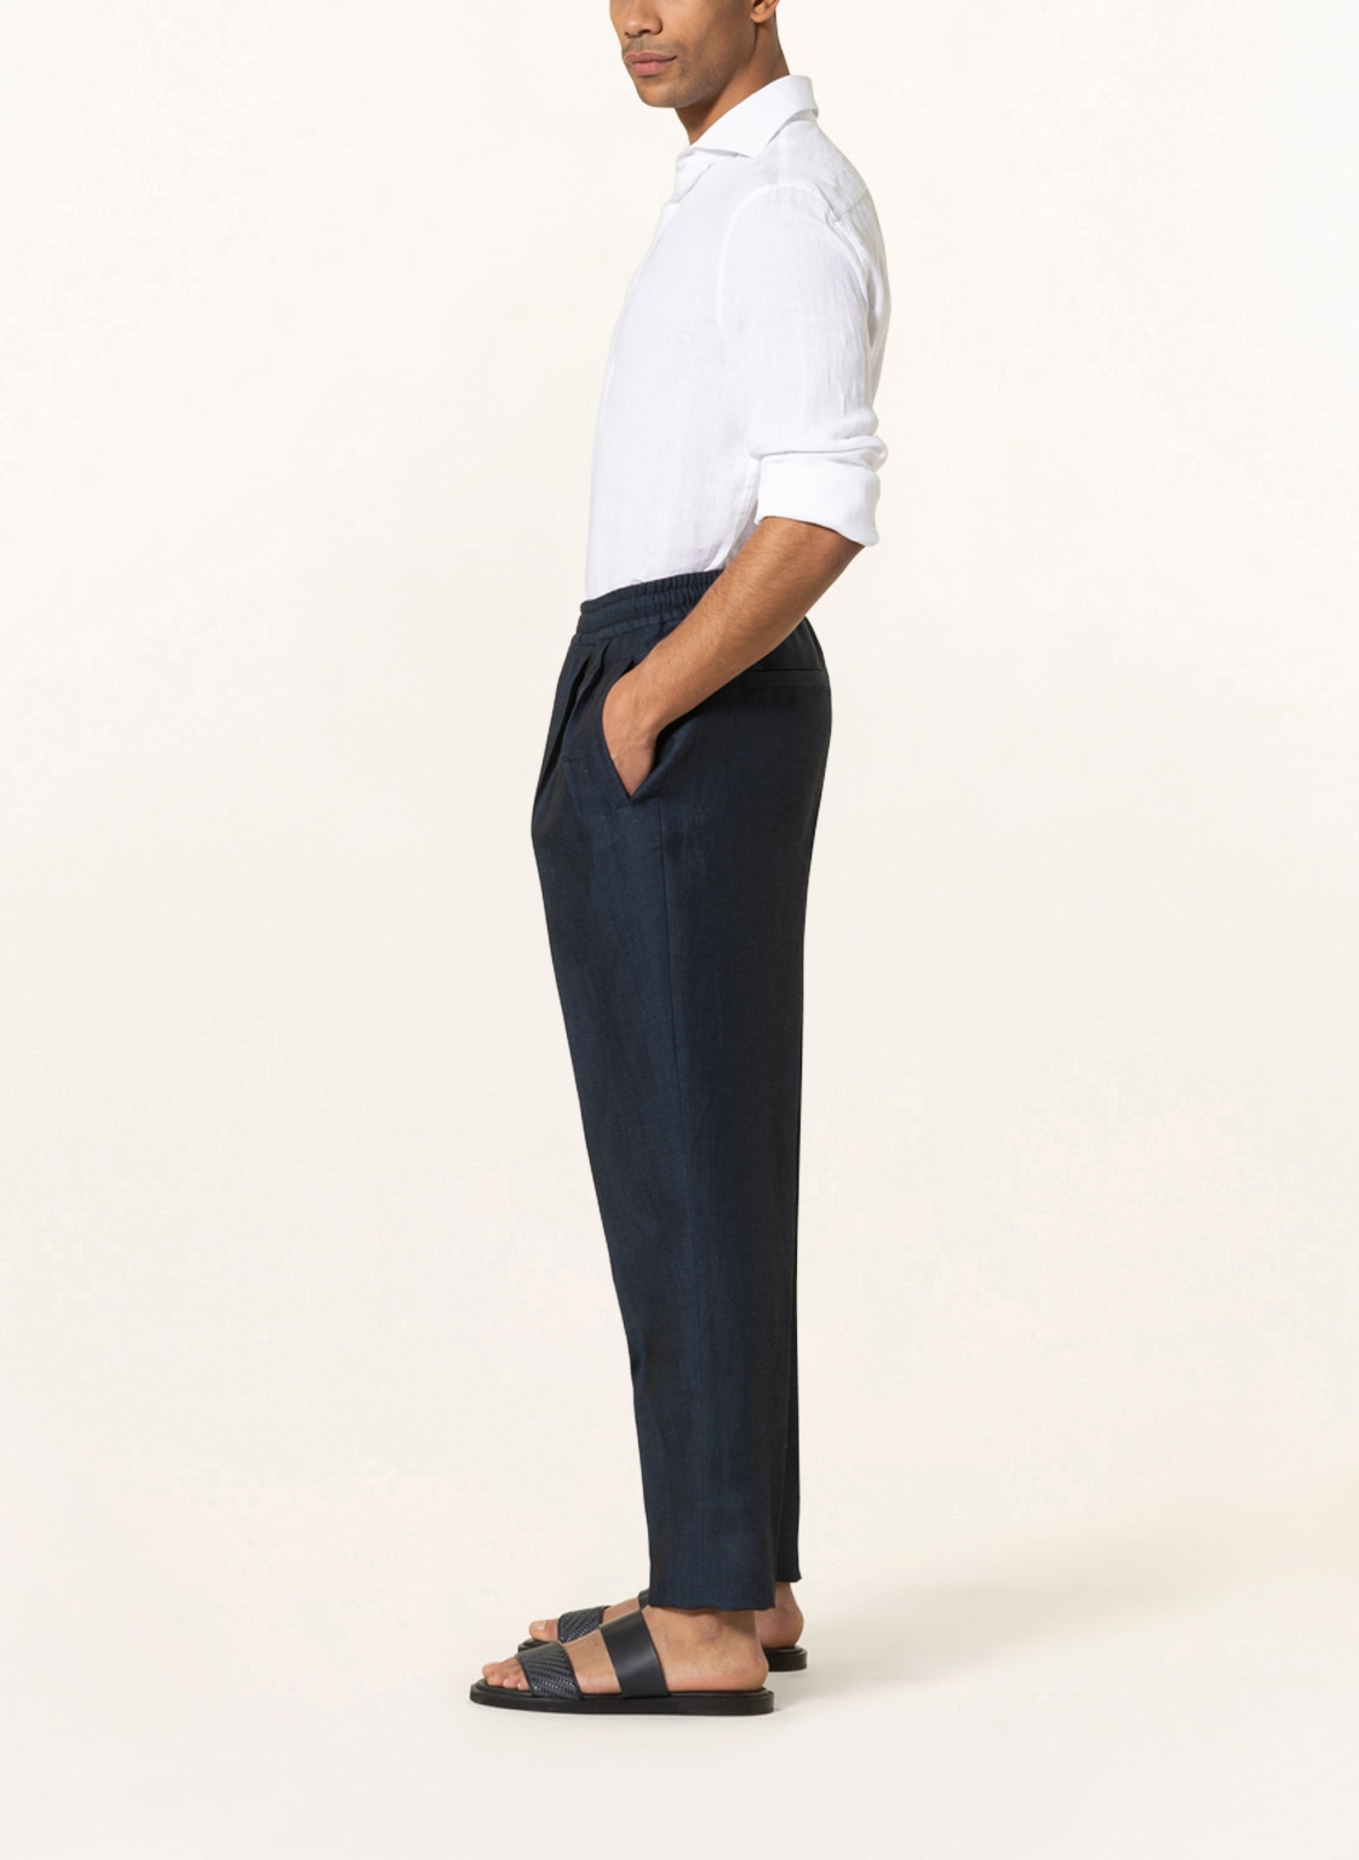 ZEGNA Pants in jogger style with linen, Color: DARK BLUE (Image 4)